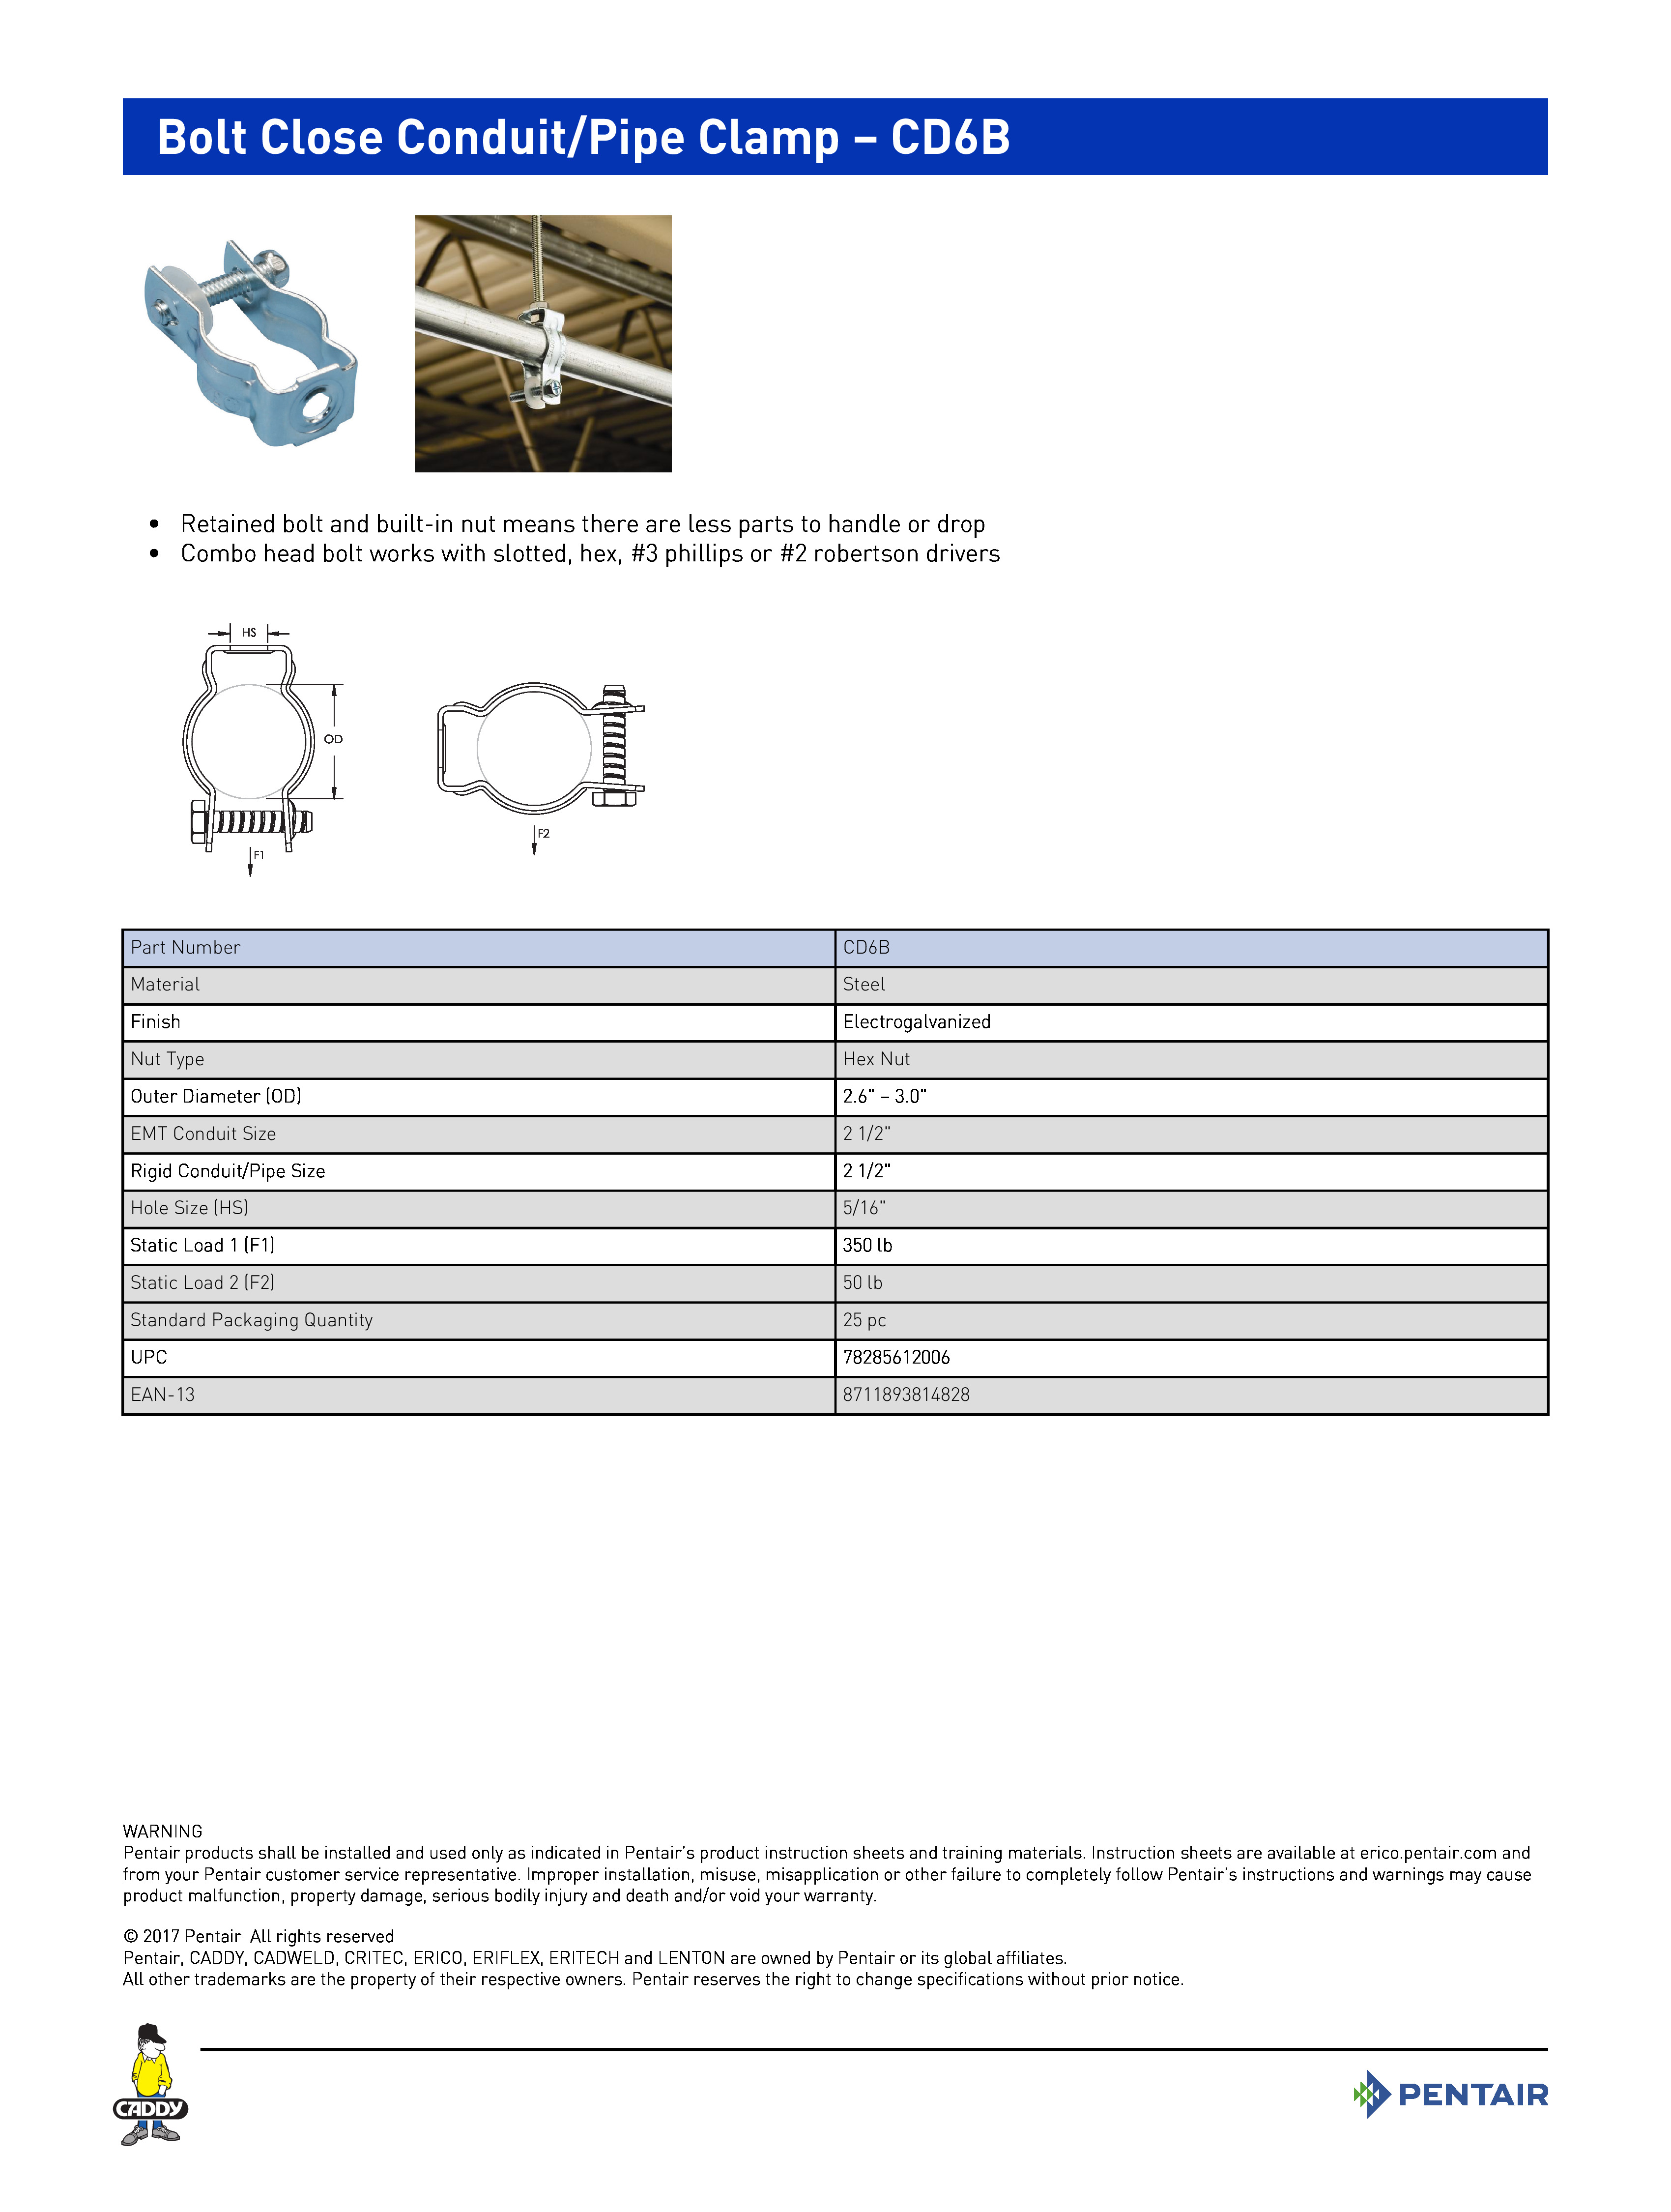 Bolt Close Conduit/Pipe Clamp – CD6B	
 	
•	Retained bolt and built-in nut means there are less parts to handle or drop	
•	Combo head bolt works with slotted, hex, #3 phillips or #2 robertson drivers	
 	
Part NumberCD6BMaterialSteelFinishElectrogalvanizedNut TypeHex NutOuter Diameter (OD)2.6" – 3.0"EMT Conduit Size2 1/2"Rigid Conduit/Pipe Size2 1/2"Hole Size (HS)5/16"Static Load 1 (F1)350 lbStatic Load 2 (F2)50 lbStandard Packaging Quantity25 pcUPC78285612006EAN-138711893814828
WARNINGPentair products shall be installed and used only as indicated in Pentair’s product instruction sheets and training materials. Instruction sheets are available at erico.pentair.com andfrom your Pentair customer service representative. Improper installation, misuse, misapplication or other failure to completely follow Pentair’s instructions and warnings may causeproduct malfunction, property damage, serious bodily injury and death and/or void your warranty. 